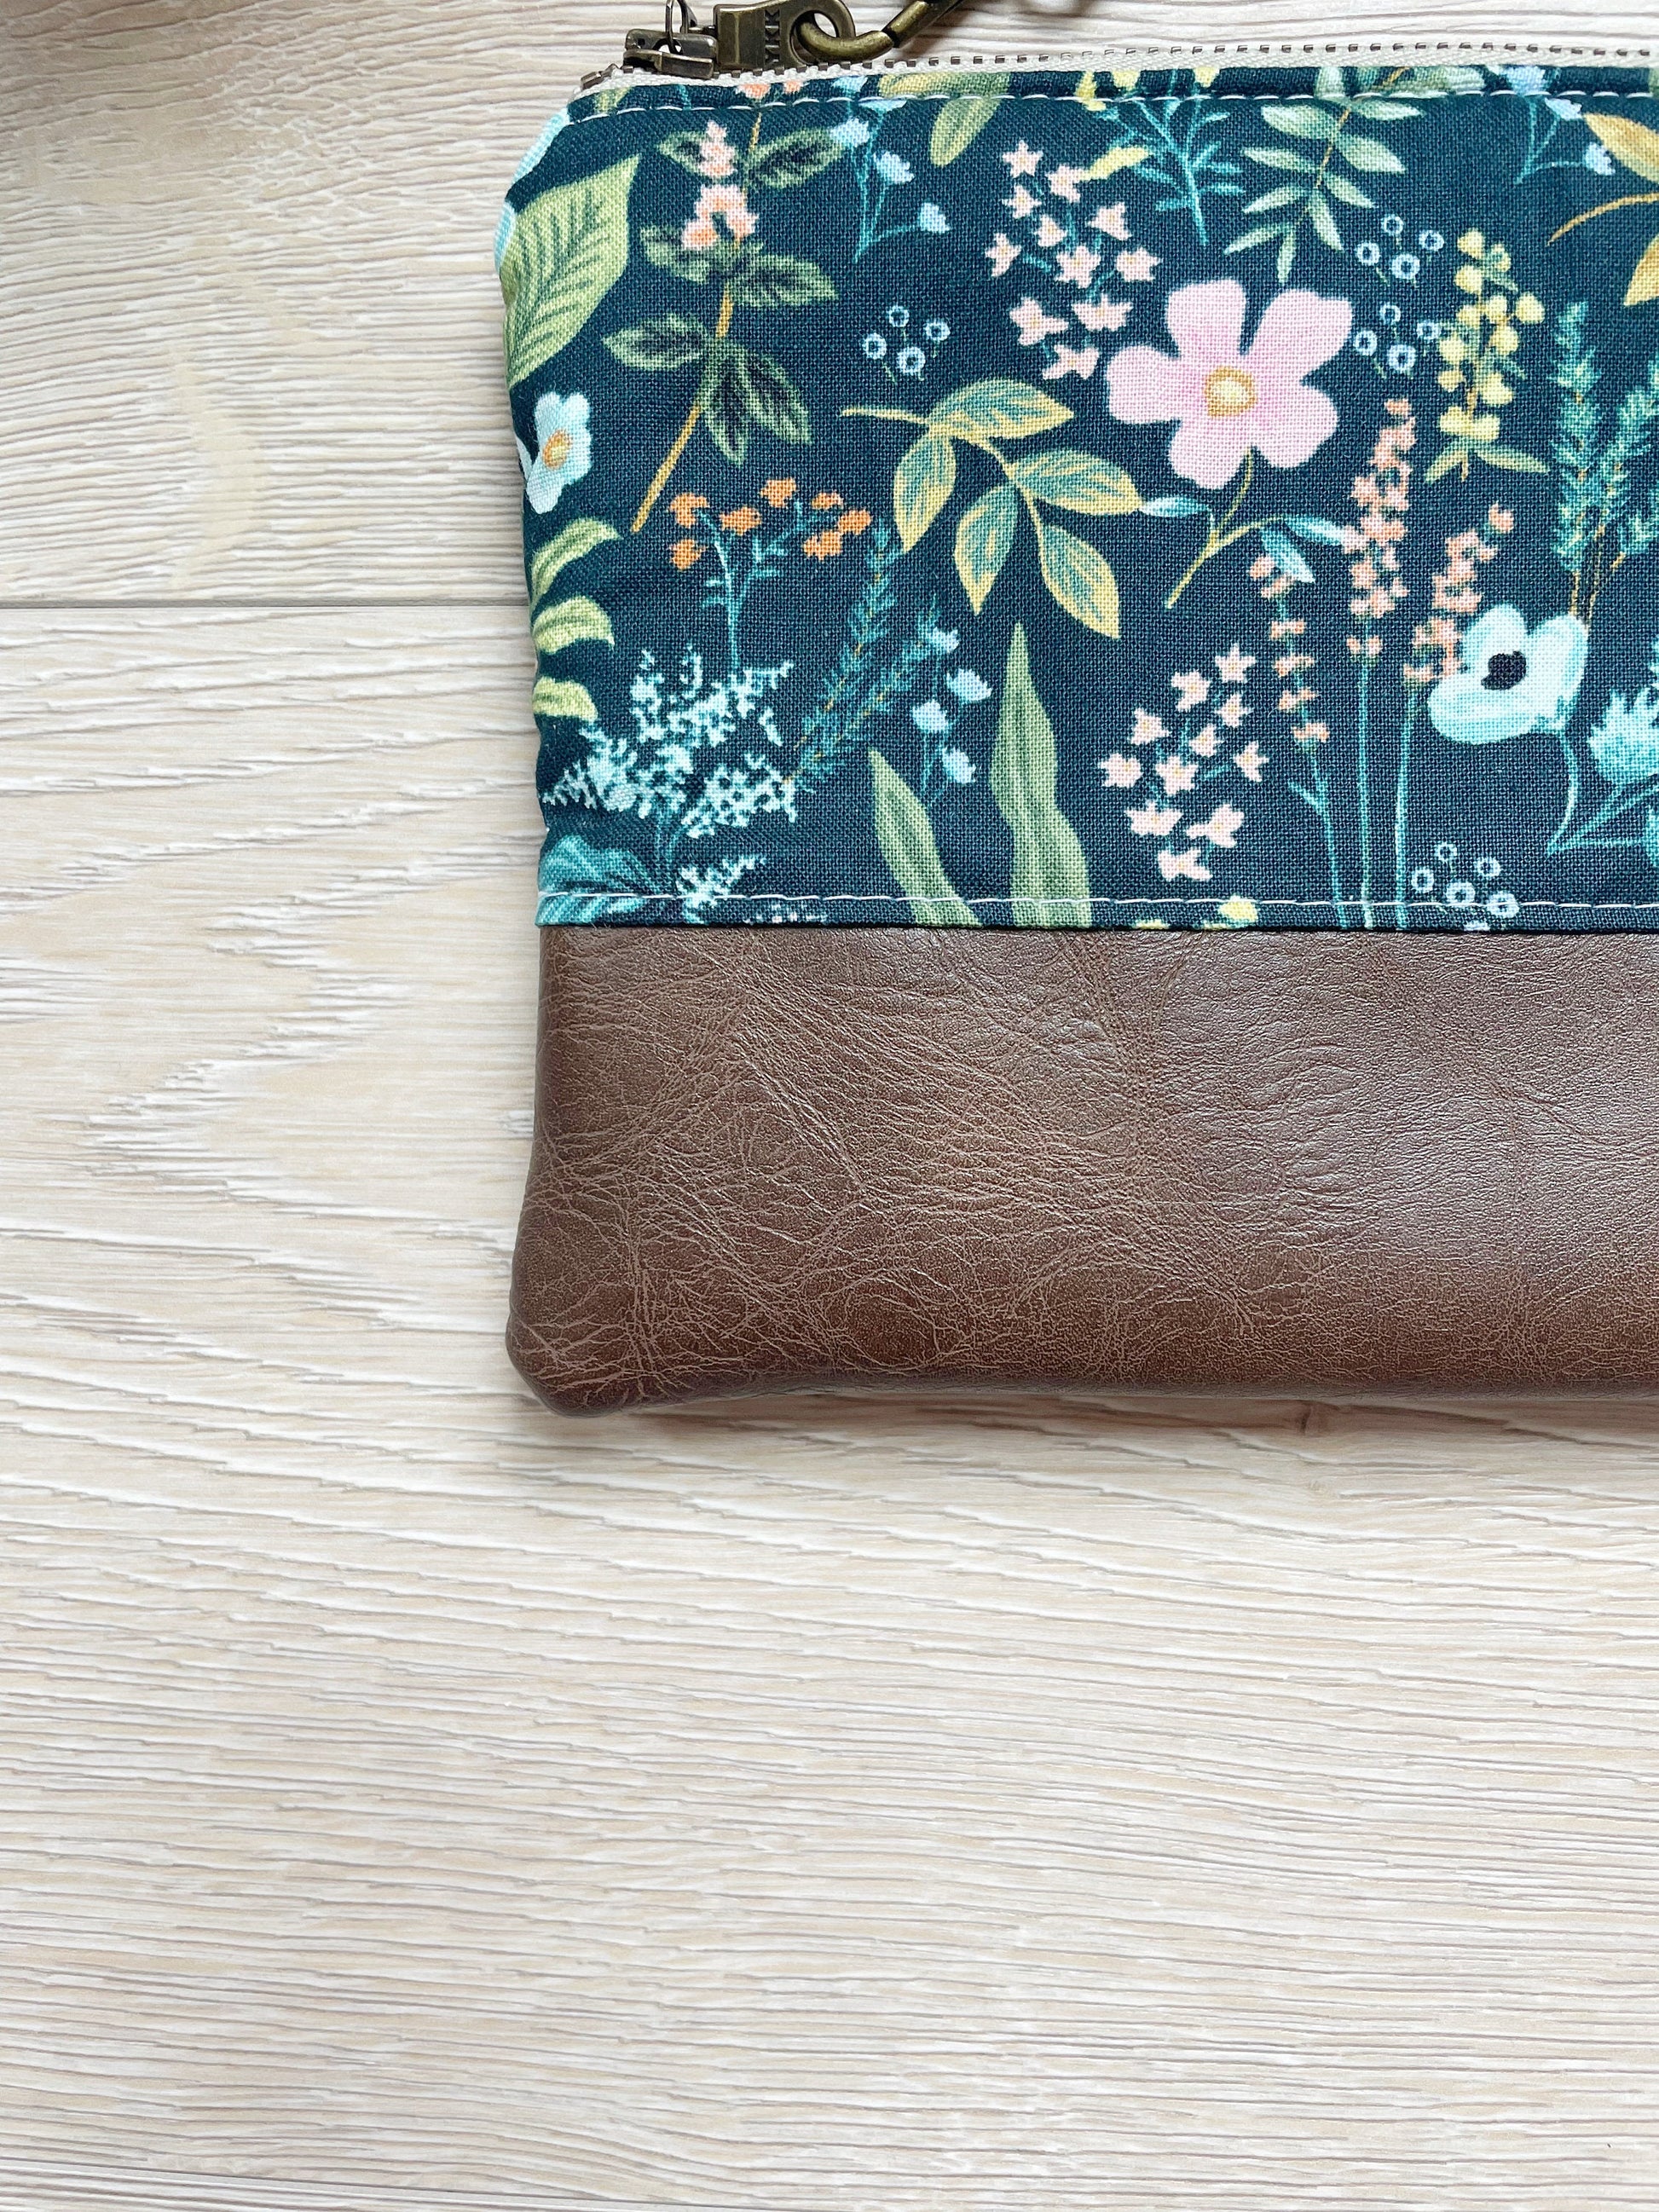 Blue floral wristlet with pink flowers and brown vinyl along the bottom. wristlet has matching wrist strap and antique brass zipper